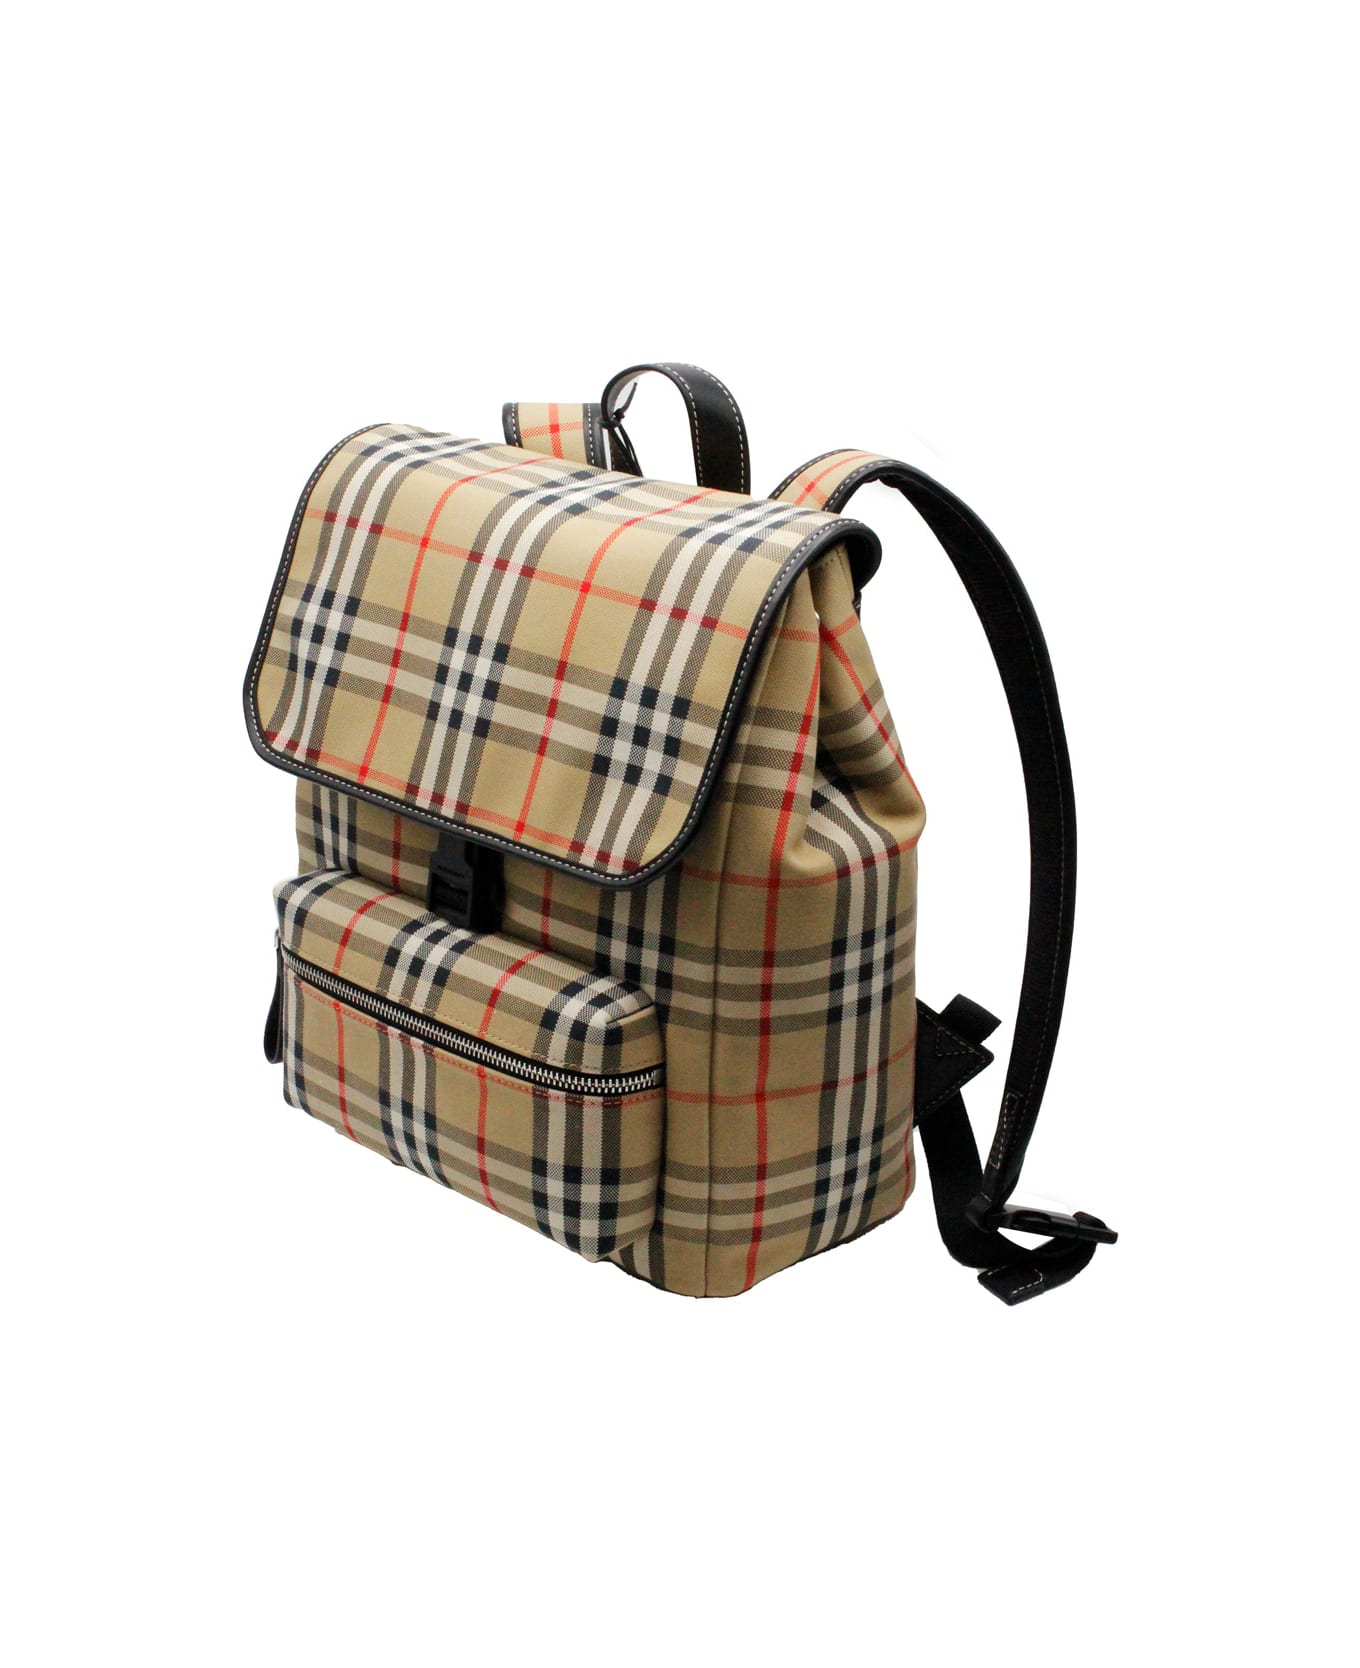 Burberry Backpack In Organic Cotton Fabric With Vintage Check Motif With Adjustable Shoulder Straps. - Beige